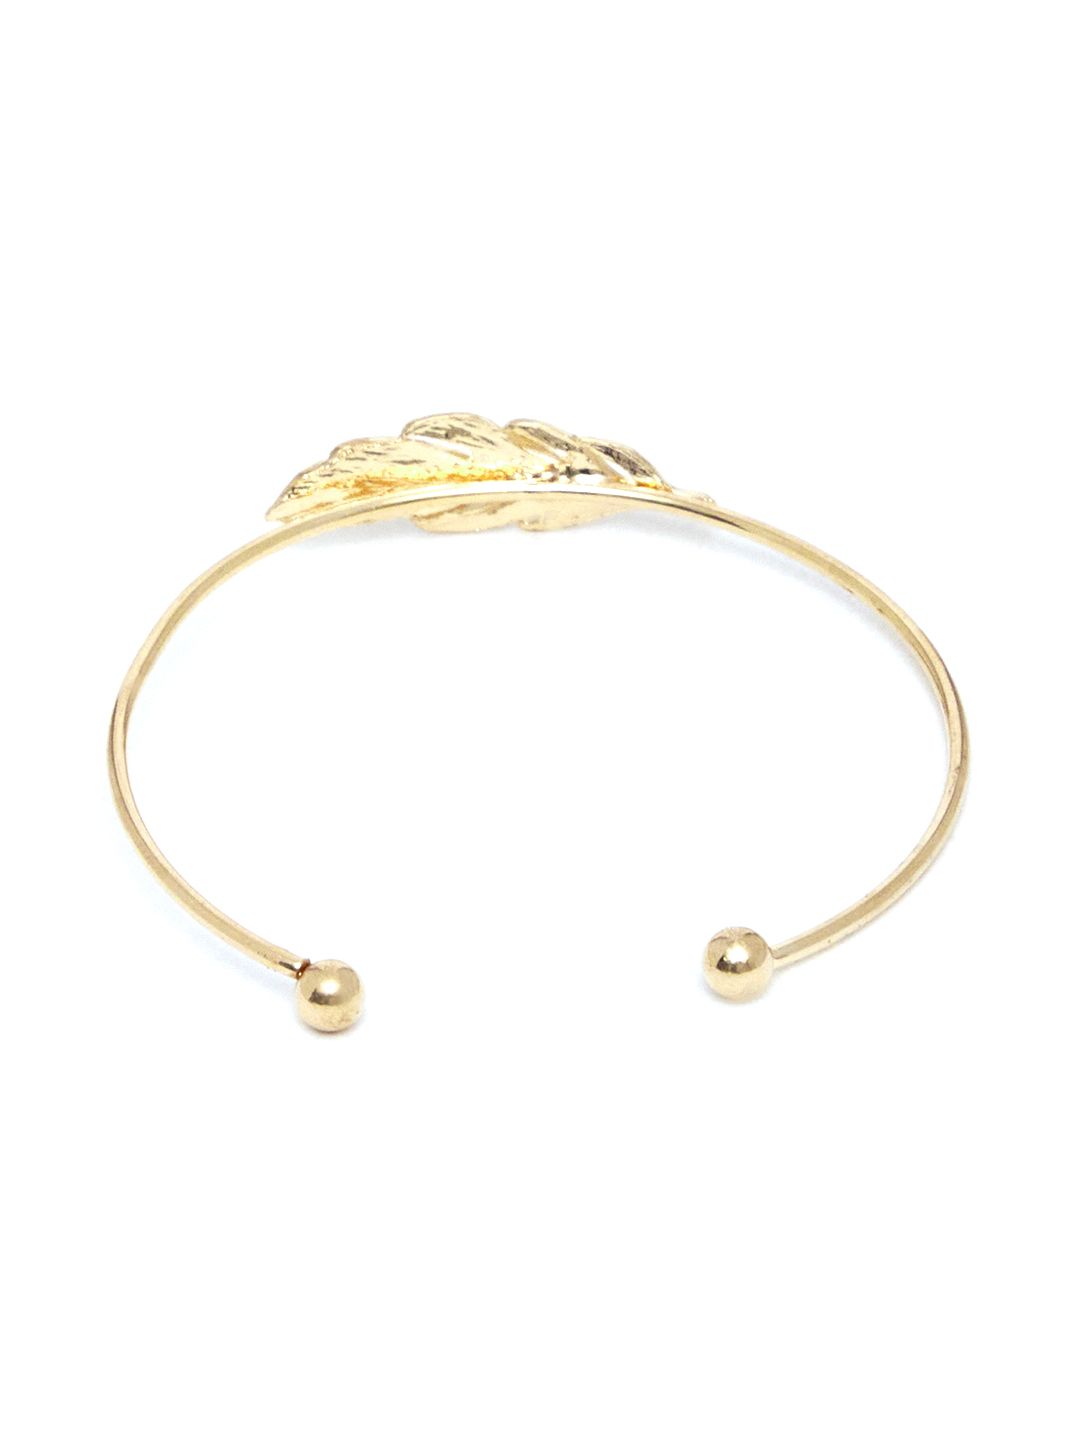 URBANIC Women Pack Of 5 Gold-Toned Bracelets Price in India